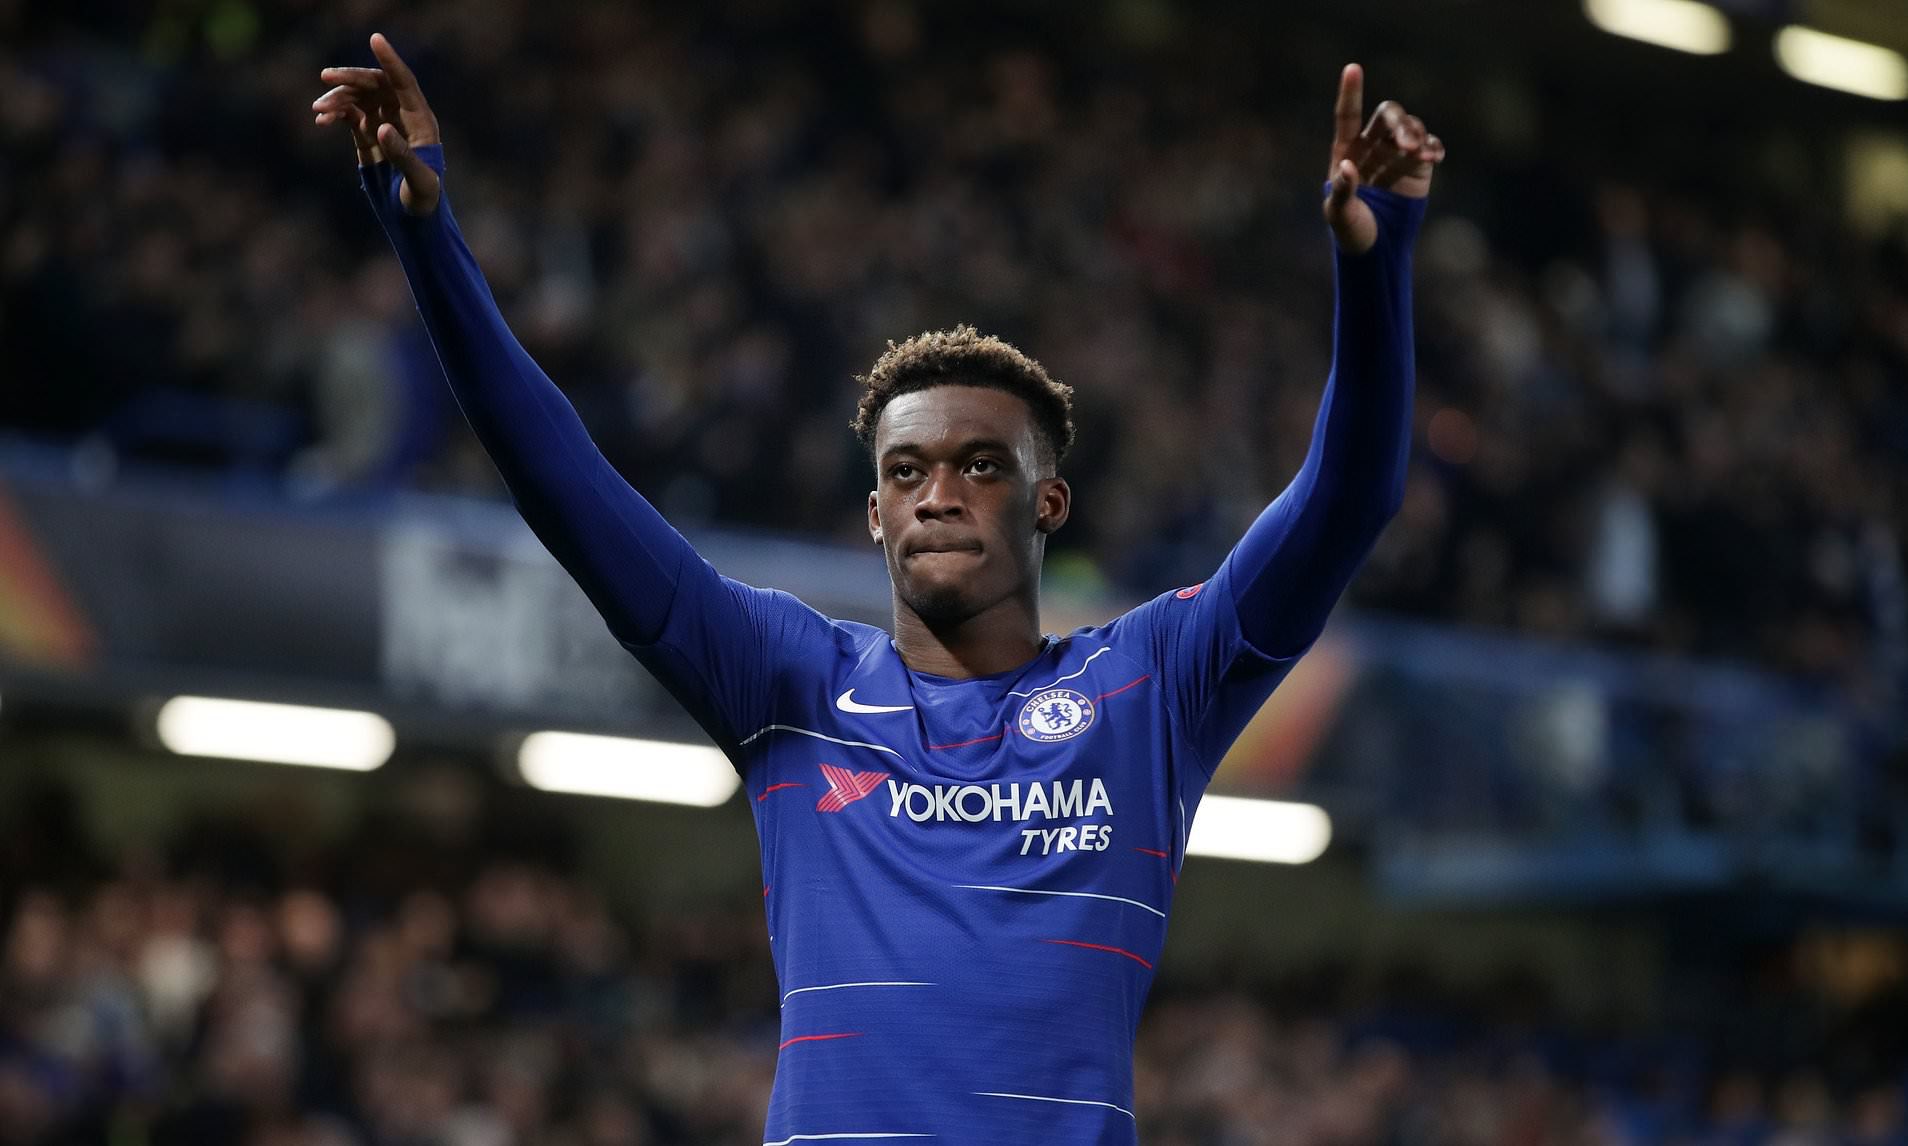 Hudson-Odoi returns to training drill just two months after surgery